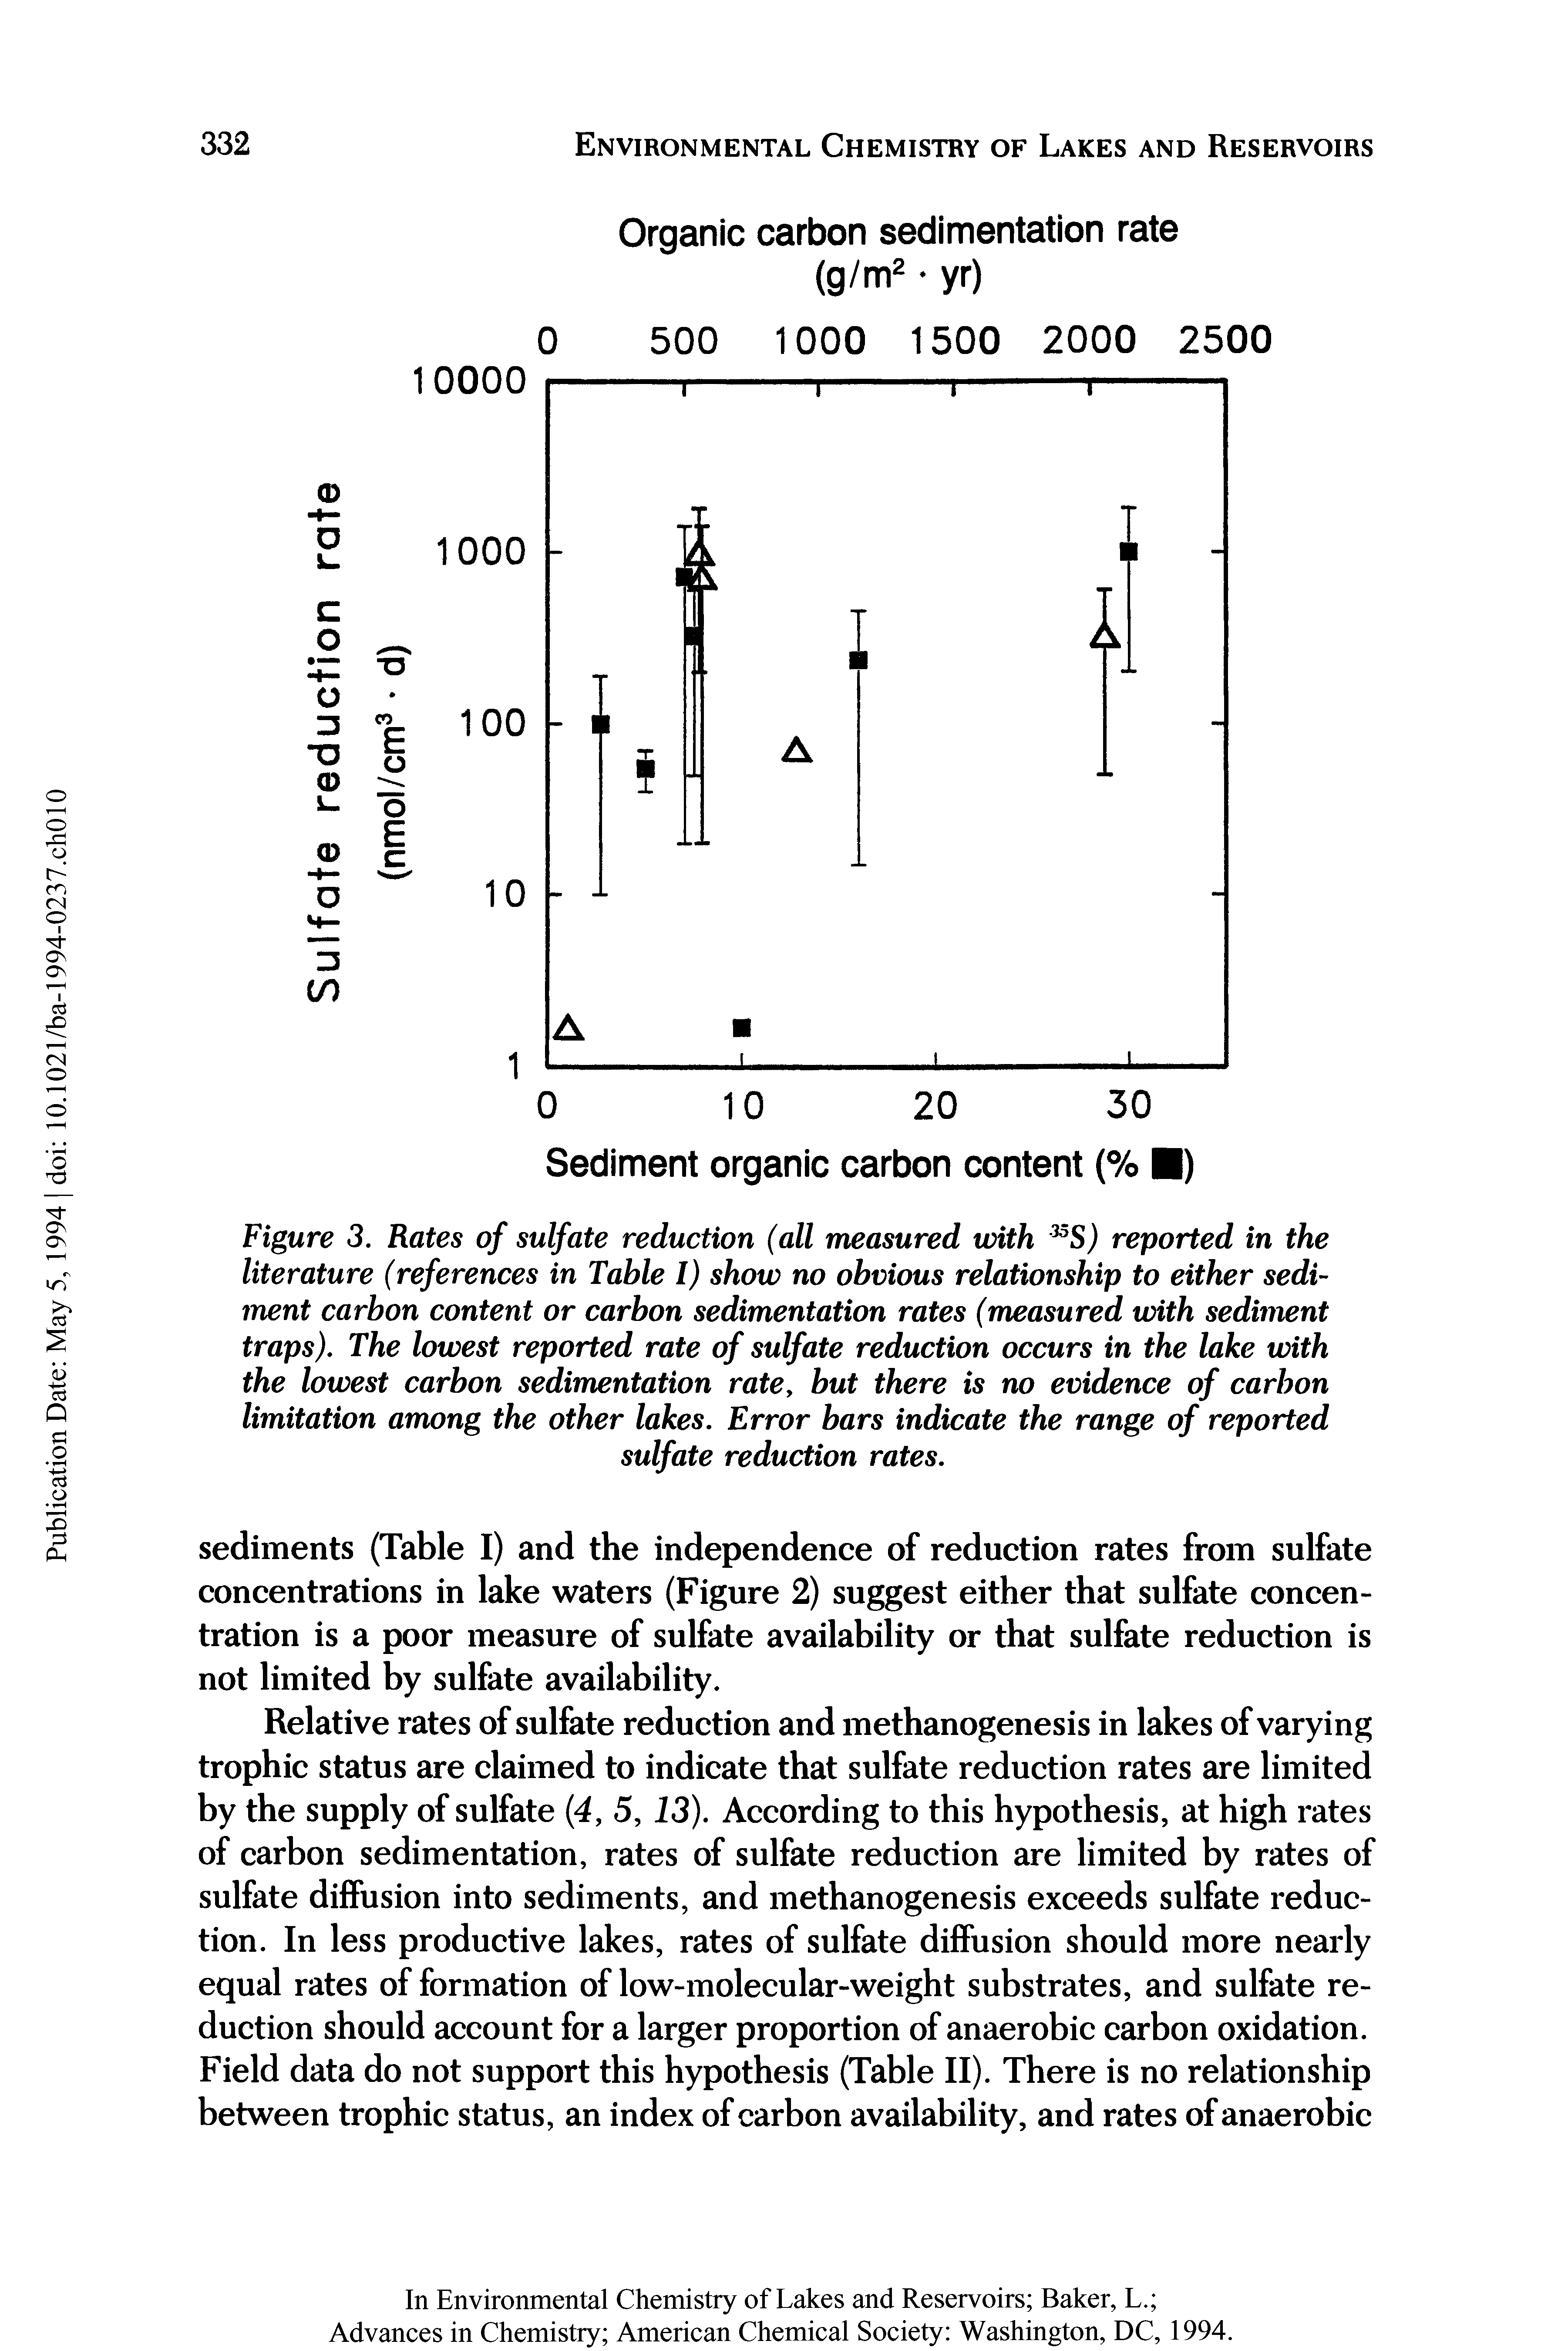 Figure 3. Rates of sulfate reduction (all measured with 35S) reported in the literature (references in Table I) show no obvious relationship to either sediment carbon content or carbon sedimentation rates (measured with sediment traps). The lowest reported rate of sulfate reduction occurs in the lake with the lowest carbon sedimentation rate, but there is no evidence of carbon limitation among the other lakes. Error bars indicate the range of reported sulfate reduction rates.